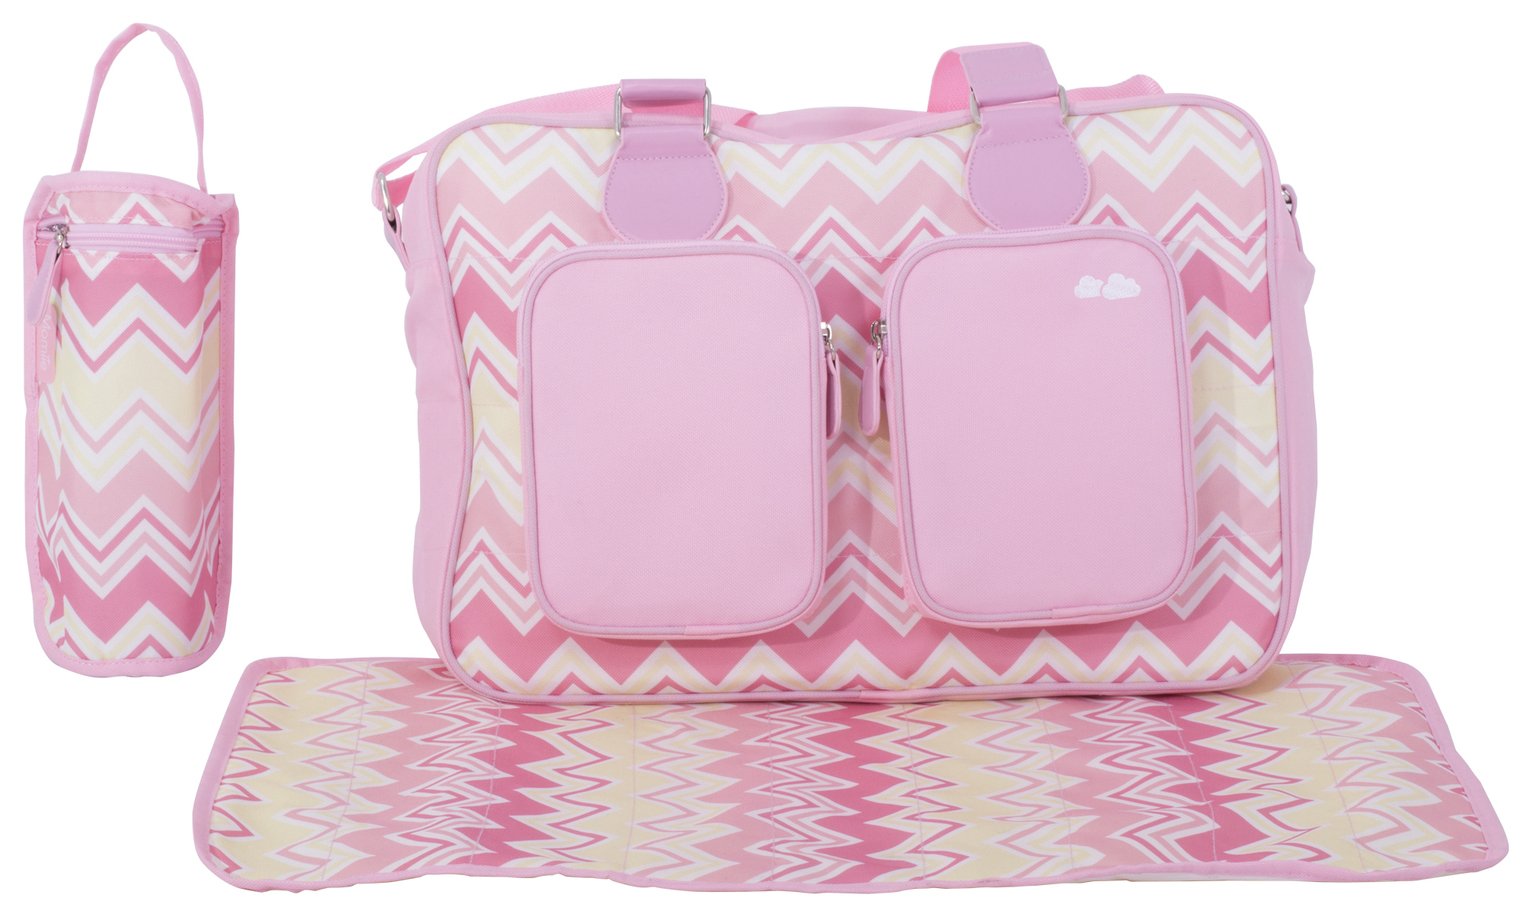 My Babiie Sam Faiers Deluxe Changing Bag - Pink Chevron